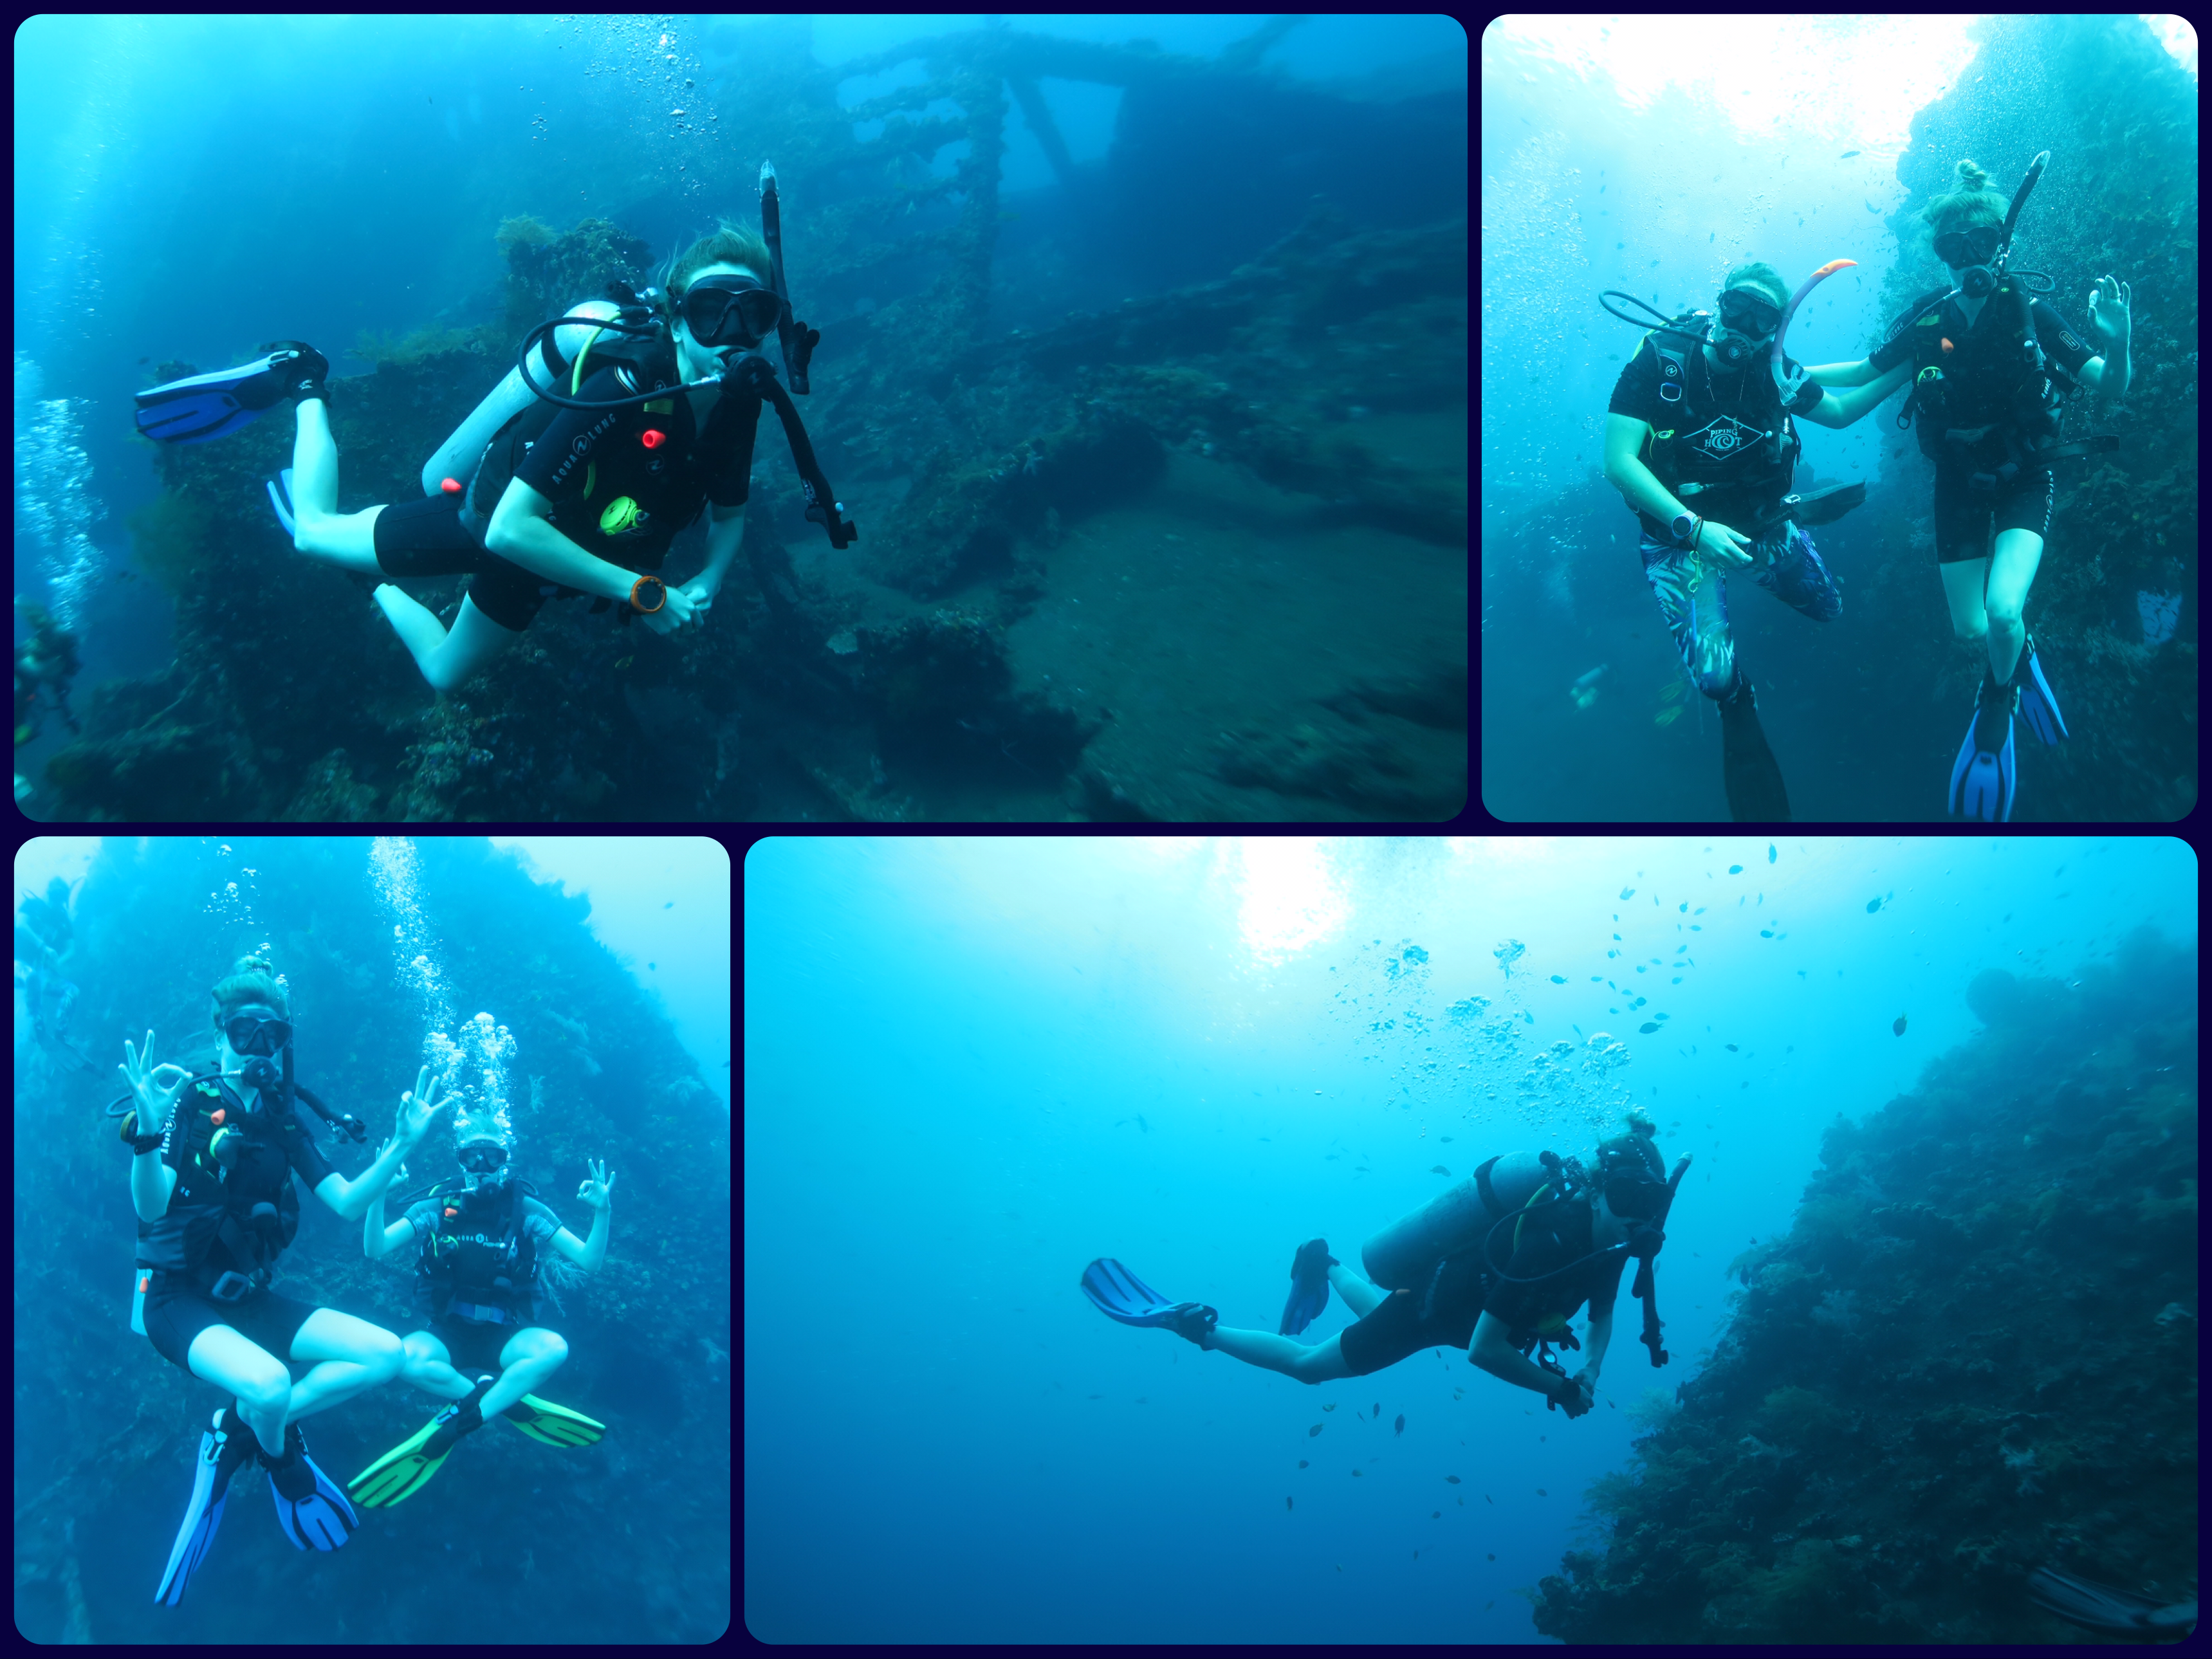 Kirstens PADI Open water course in Amed, Bali